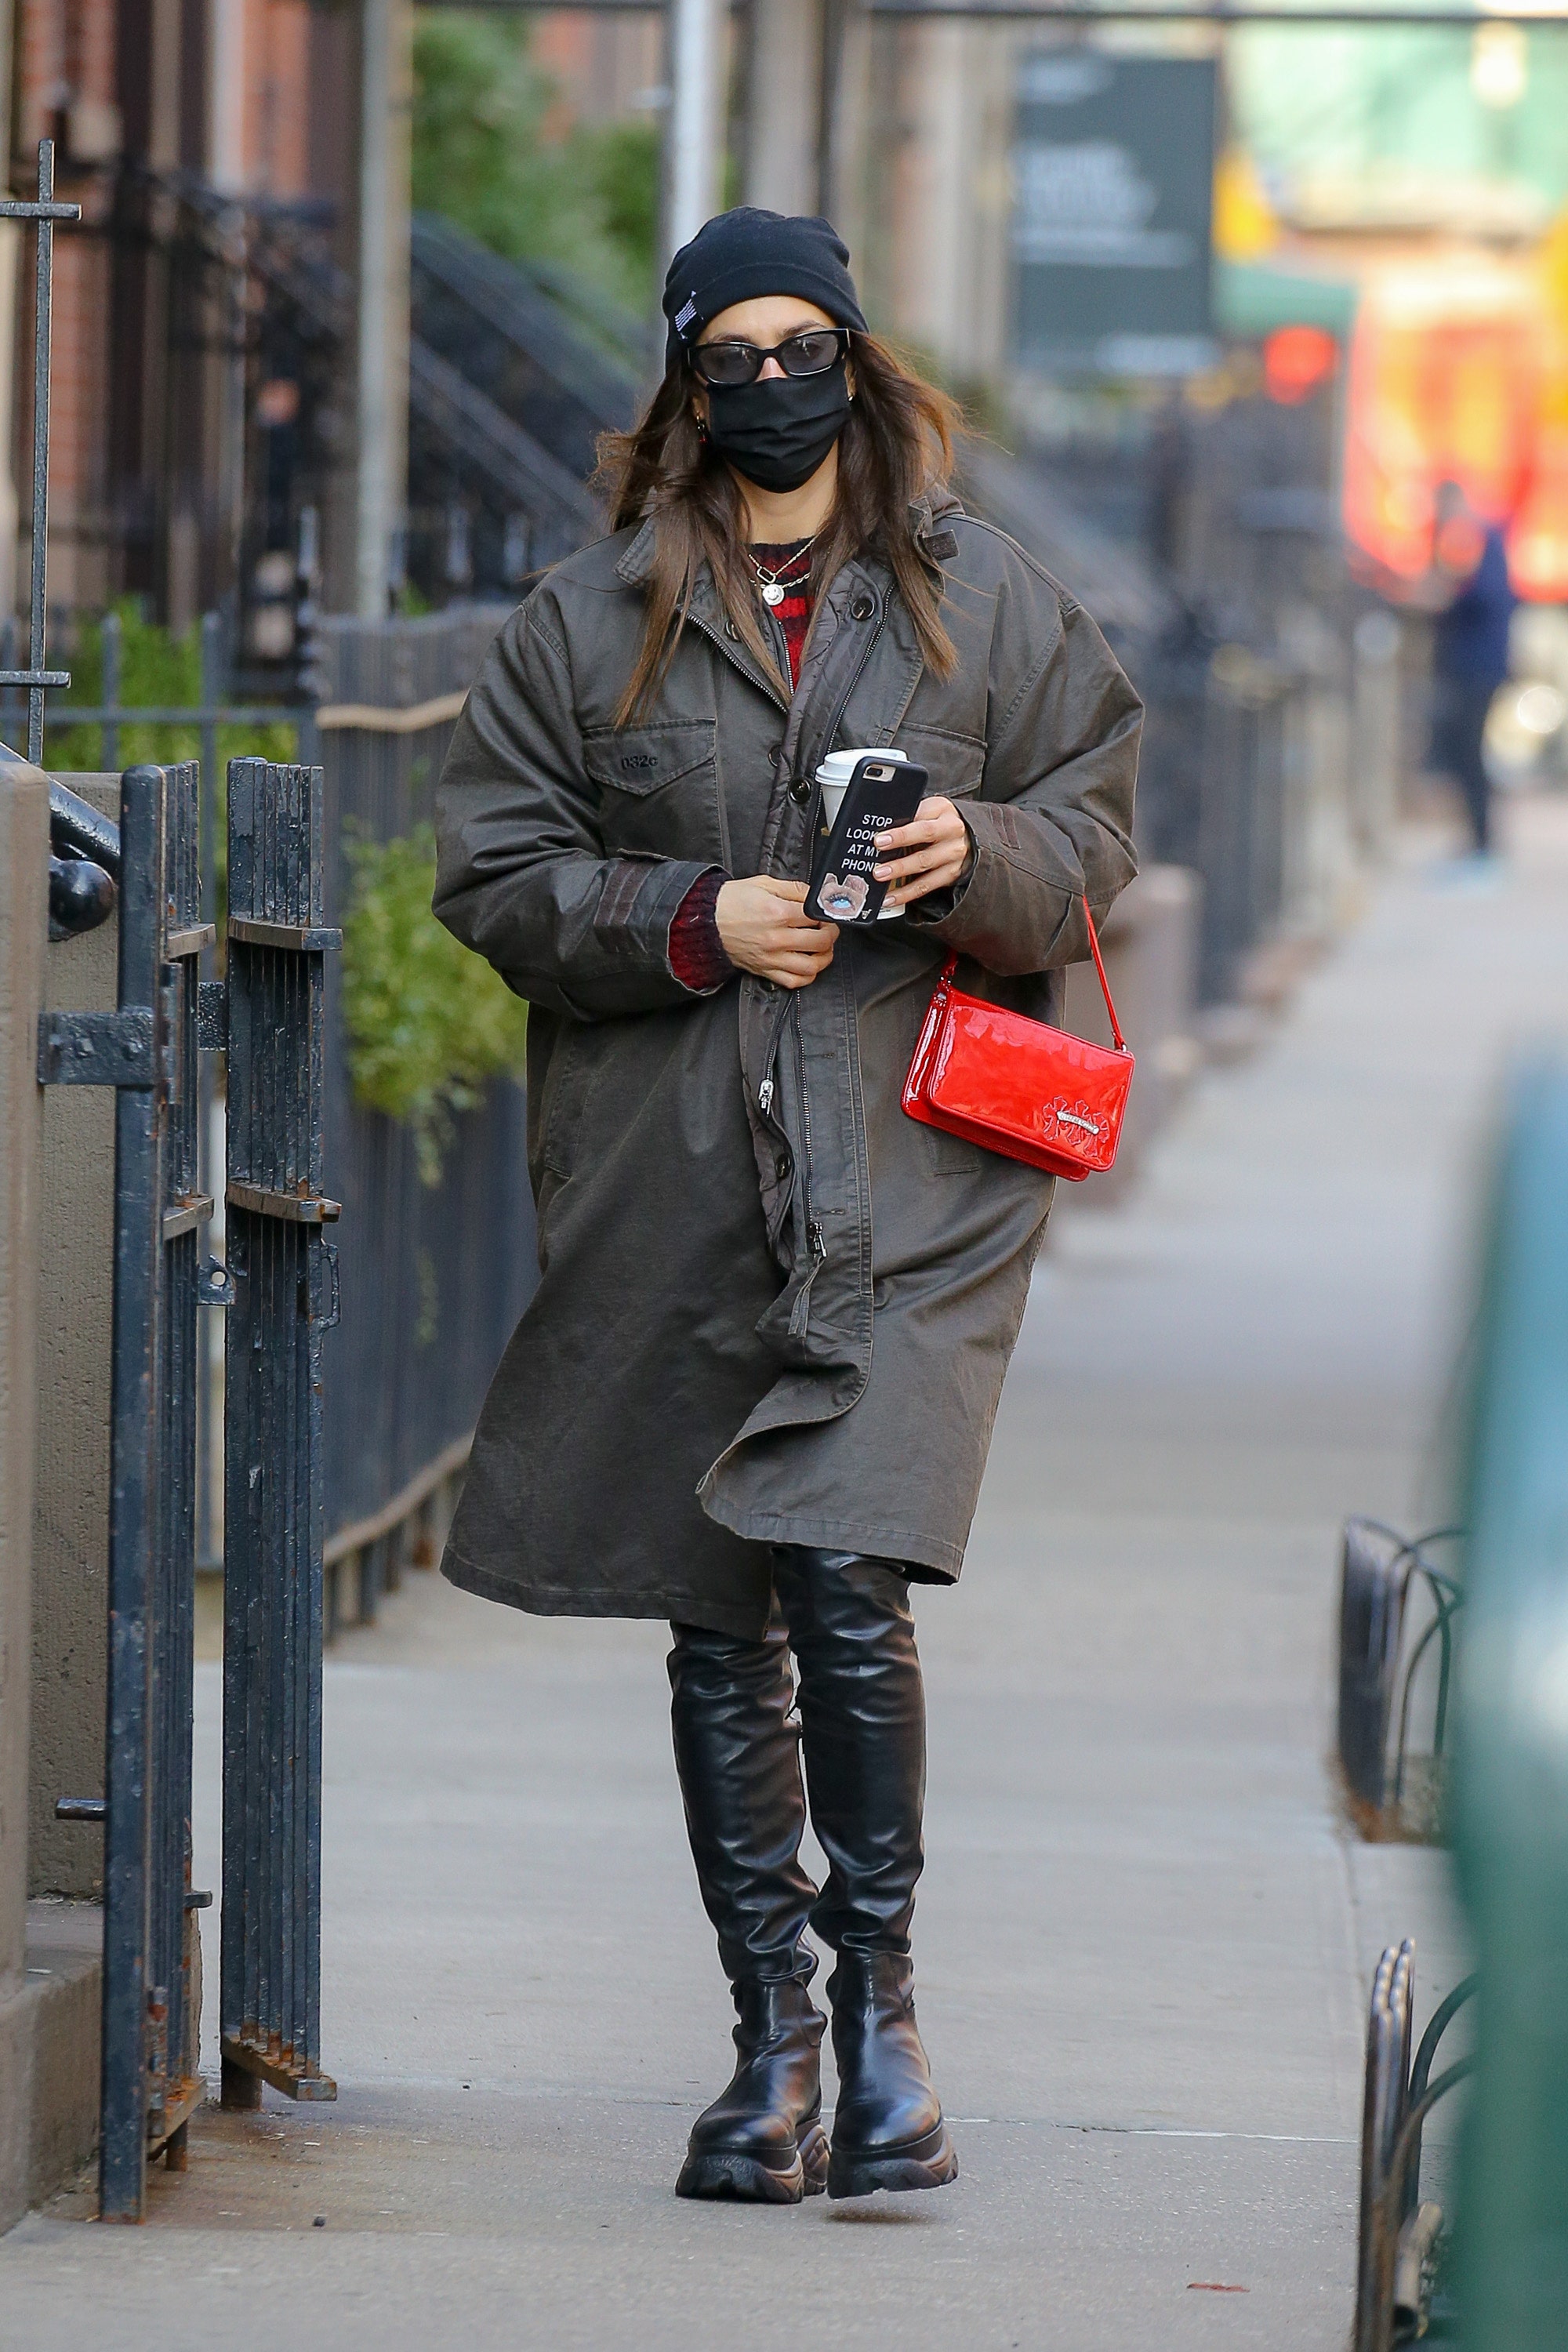 Irina Shayk look stylish in a black leather pants with a striped red and black top while out and about in NYCPictured...